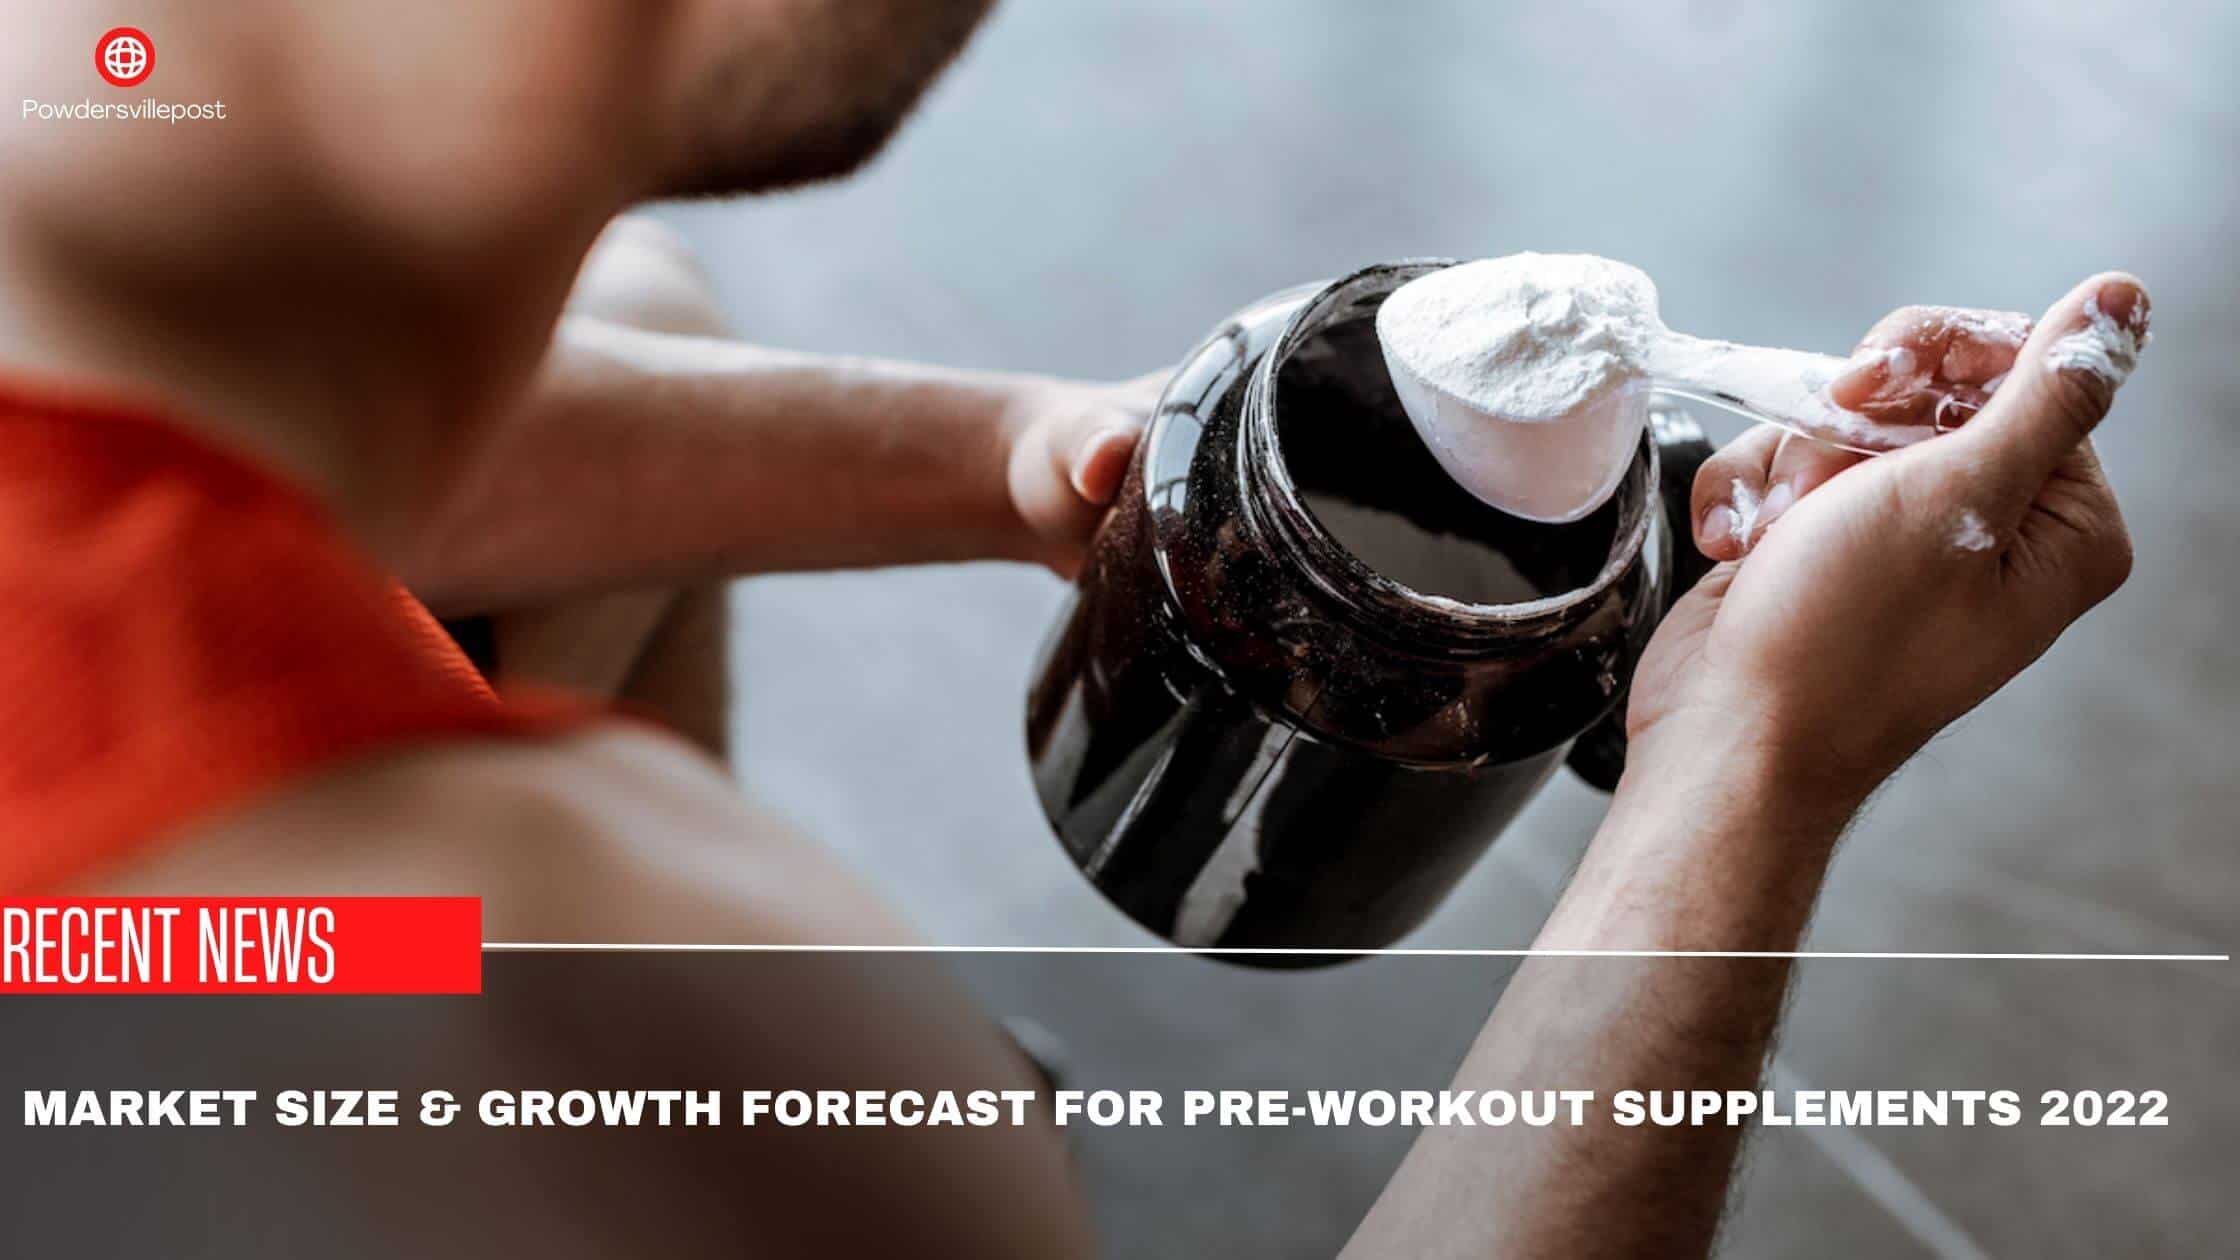 Market Size & Growth Forecast For Pre-Workout Supplements 2022